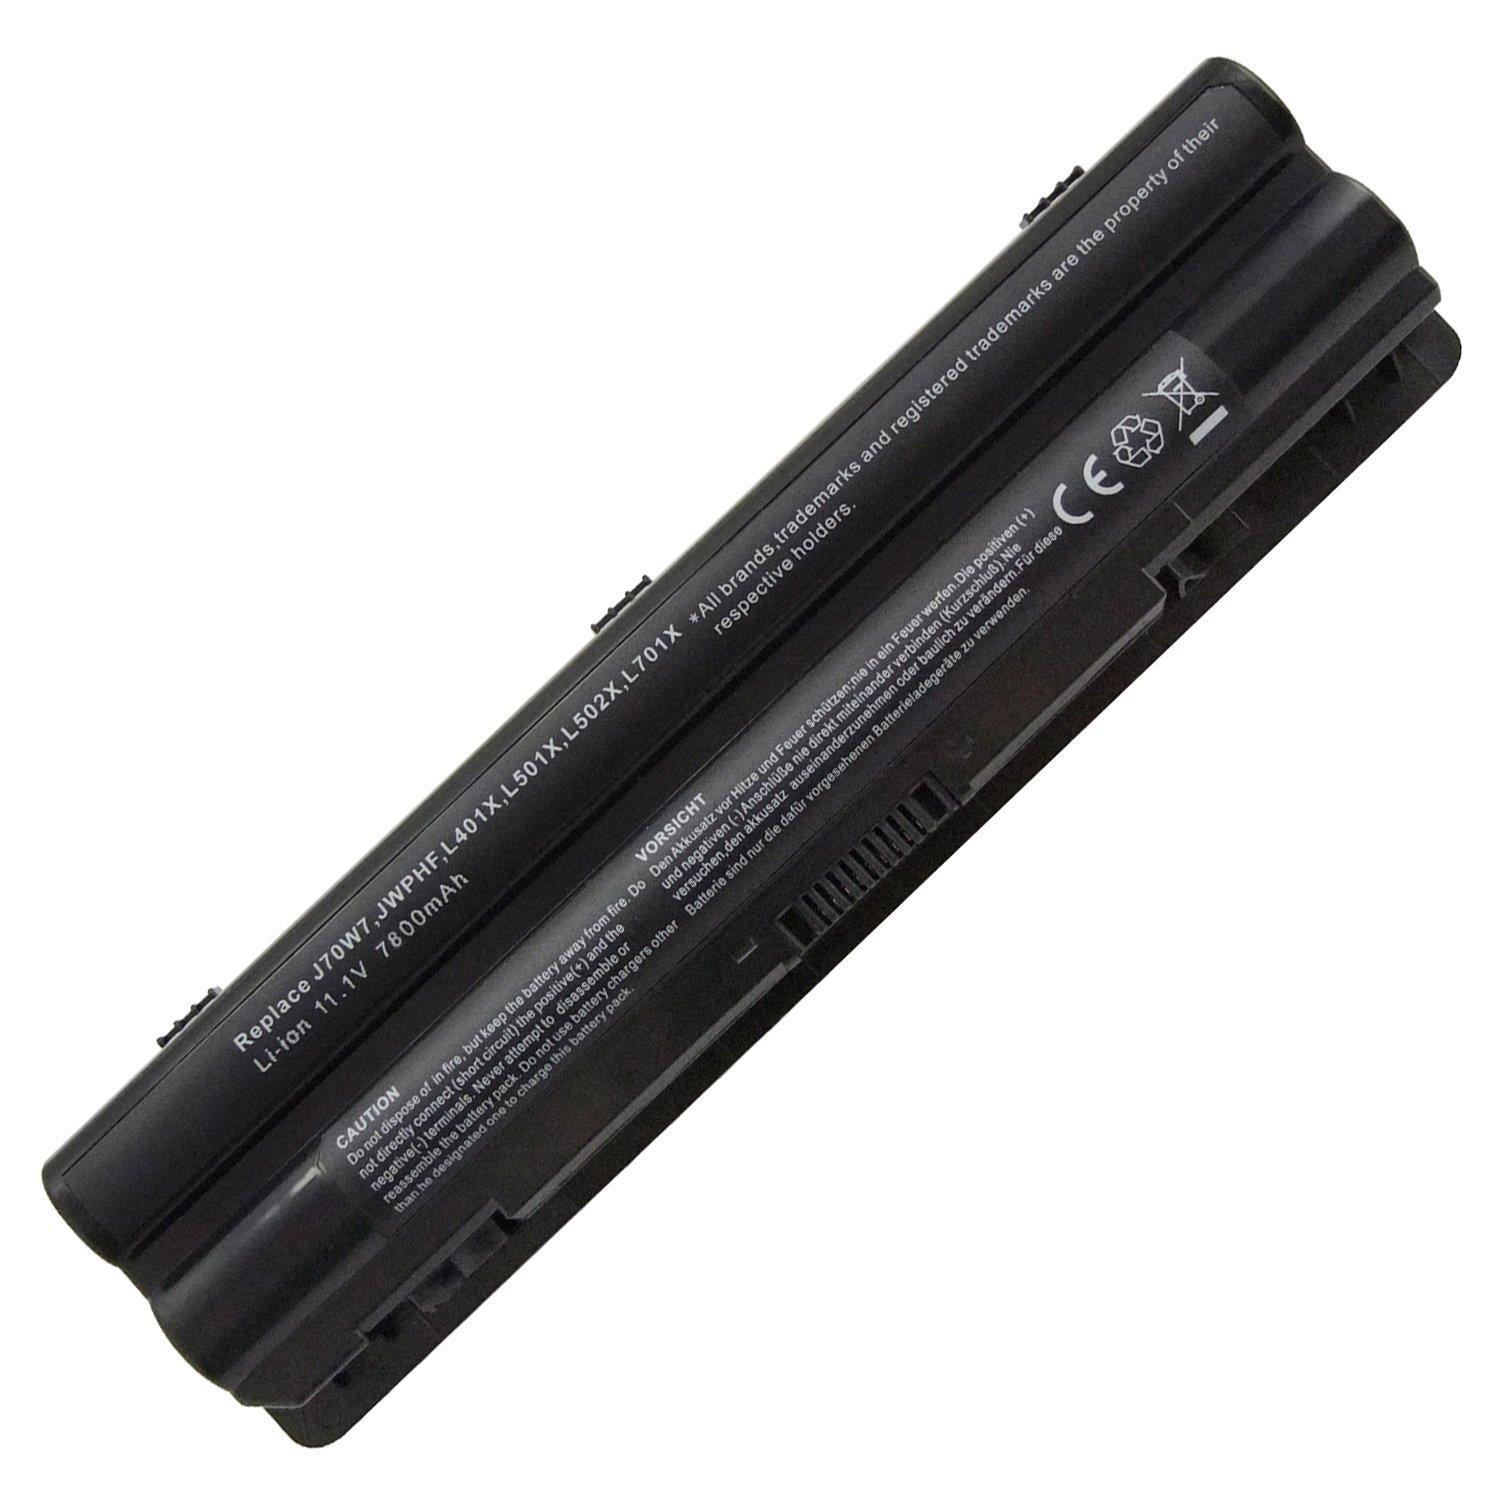 9 Cell Extended Replacement Battery for DELL P09E,P09E001,P09E002,P11F,P11F001,P12G,P12G001,R4CN5, 312 1127,453 10186, WHXY3